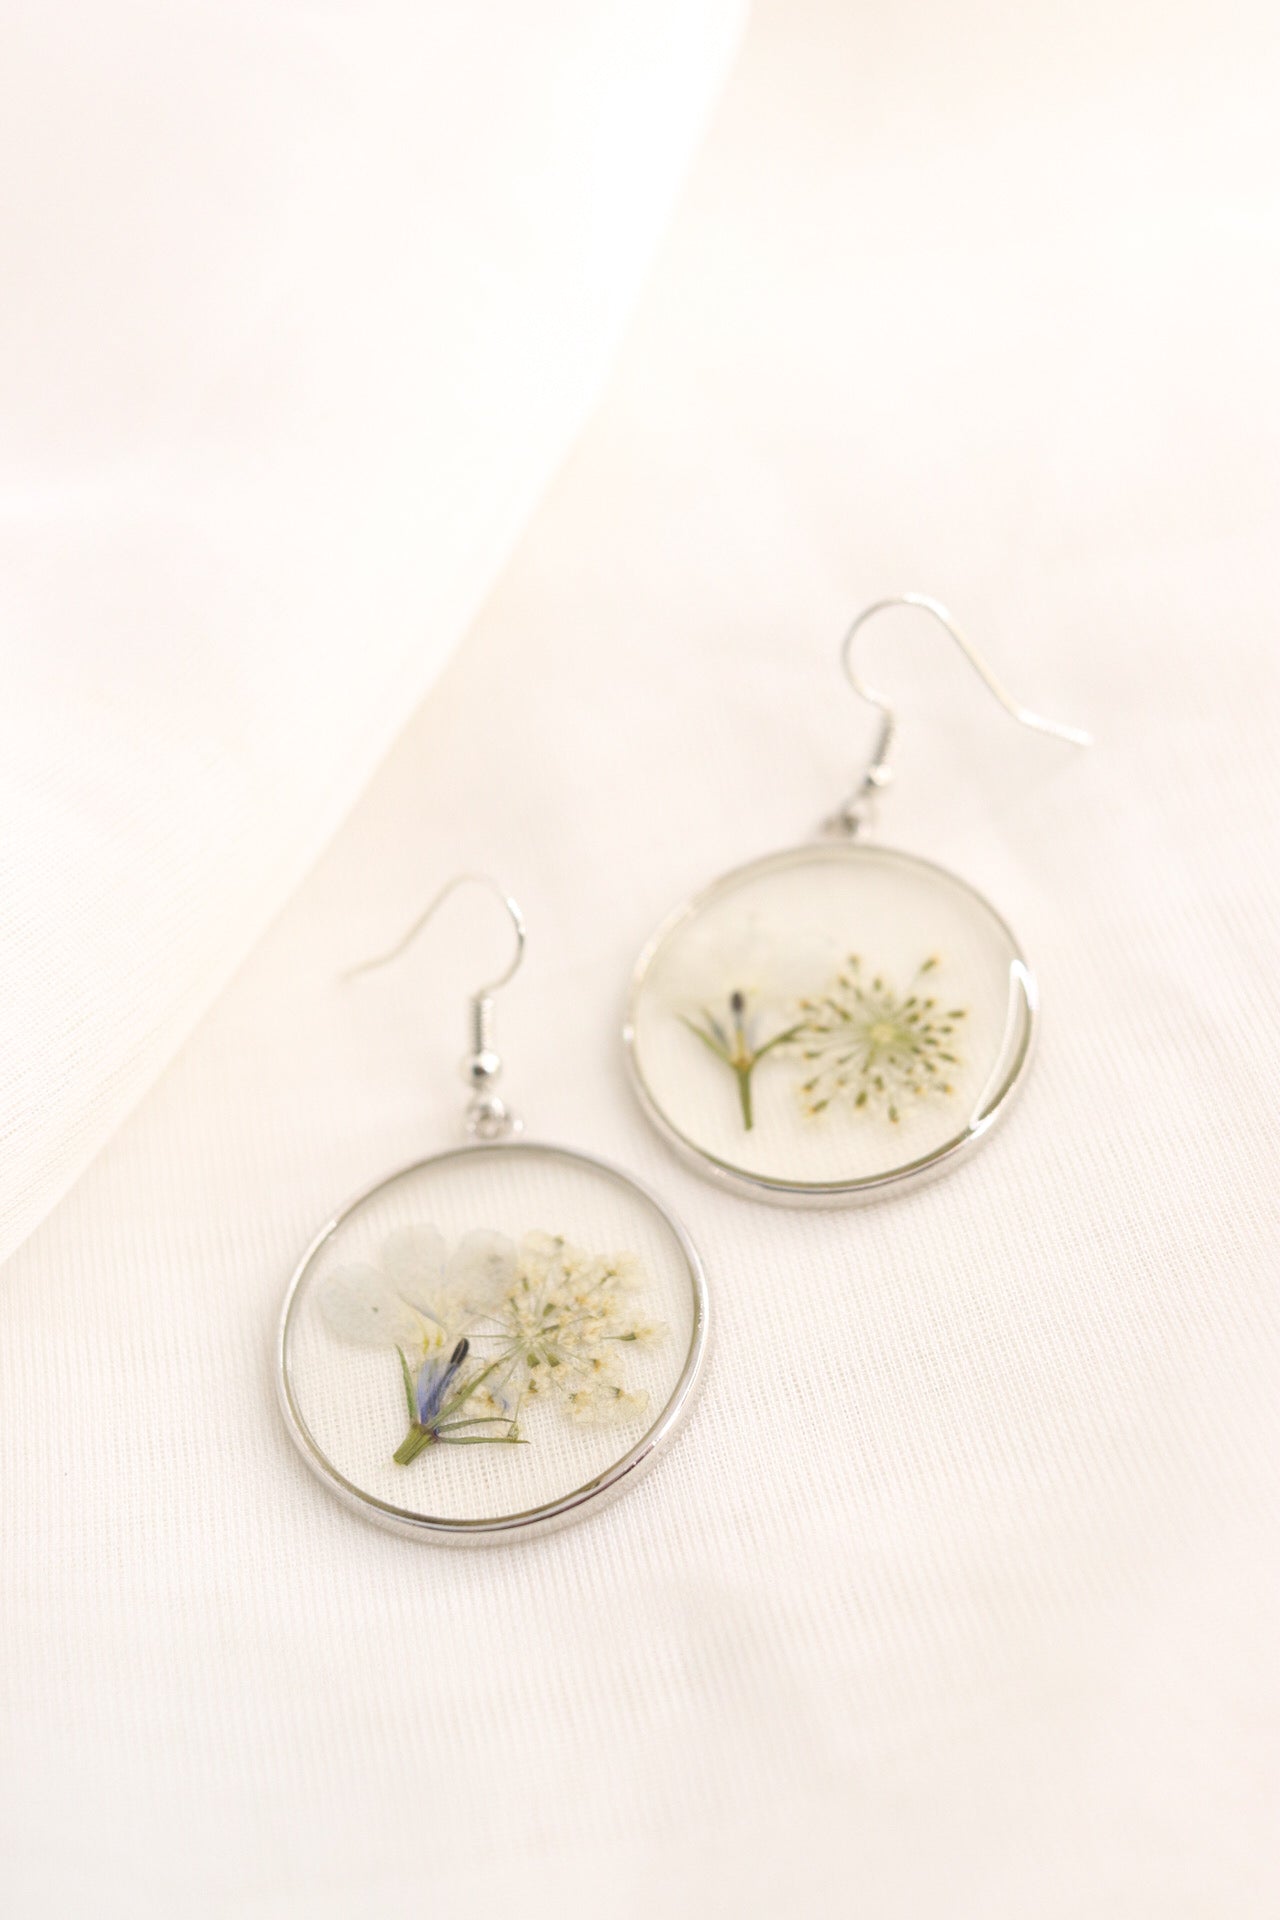 Forget Me Not Earrings Real Pressed Flower Earrings, Botanical Clear Resin Wildflower Silver Earring, Perfect Gift For Her